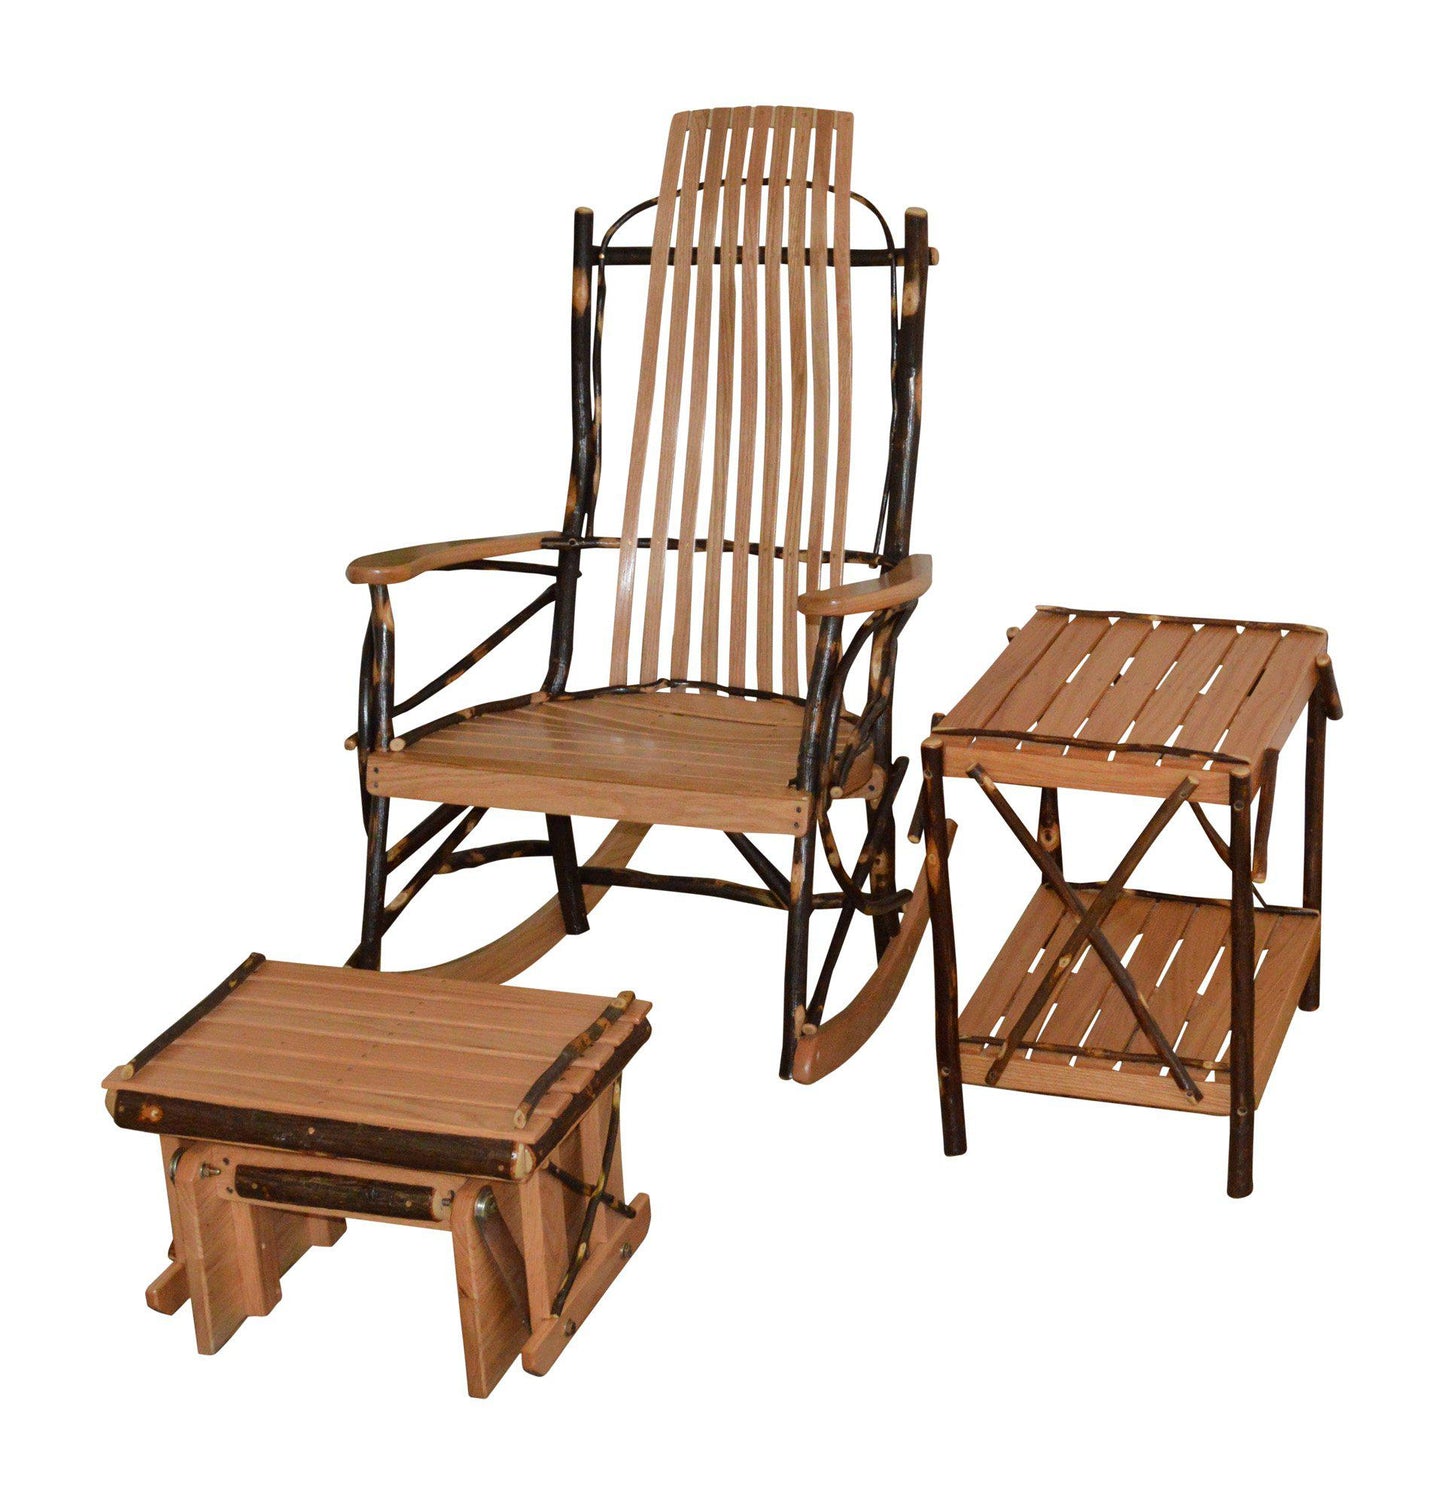 A&L Furniture Co. Amish Bentwood Hickory 9-Slat Rocking Chair w Gliding Ottoman and End Table - LEAD TIME TO SHIP 10 BUSINESS DAYS